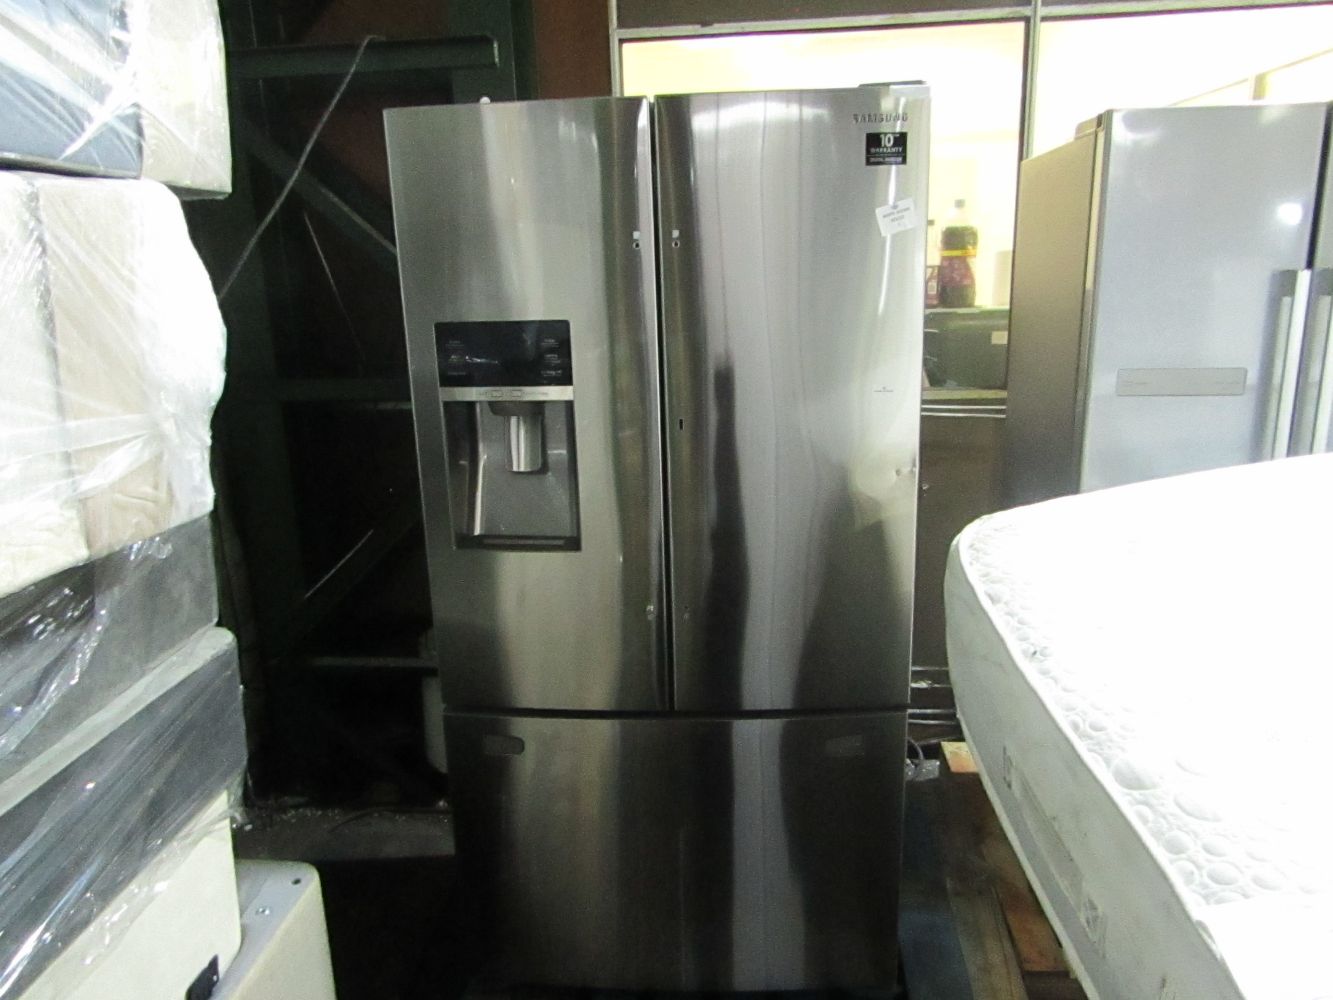 Fridges and Washing machines from Haier, Samsung, LG and More